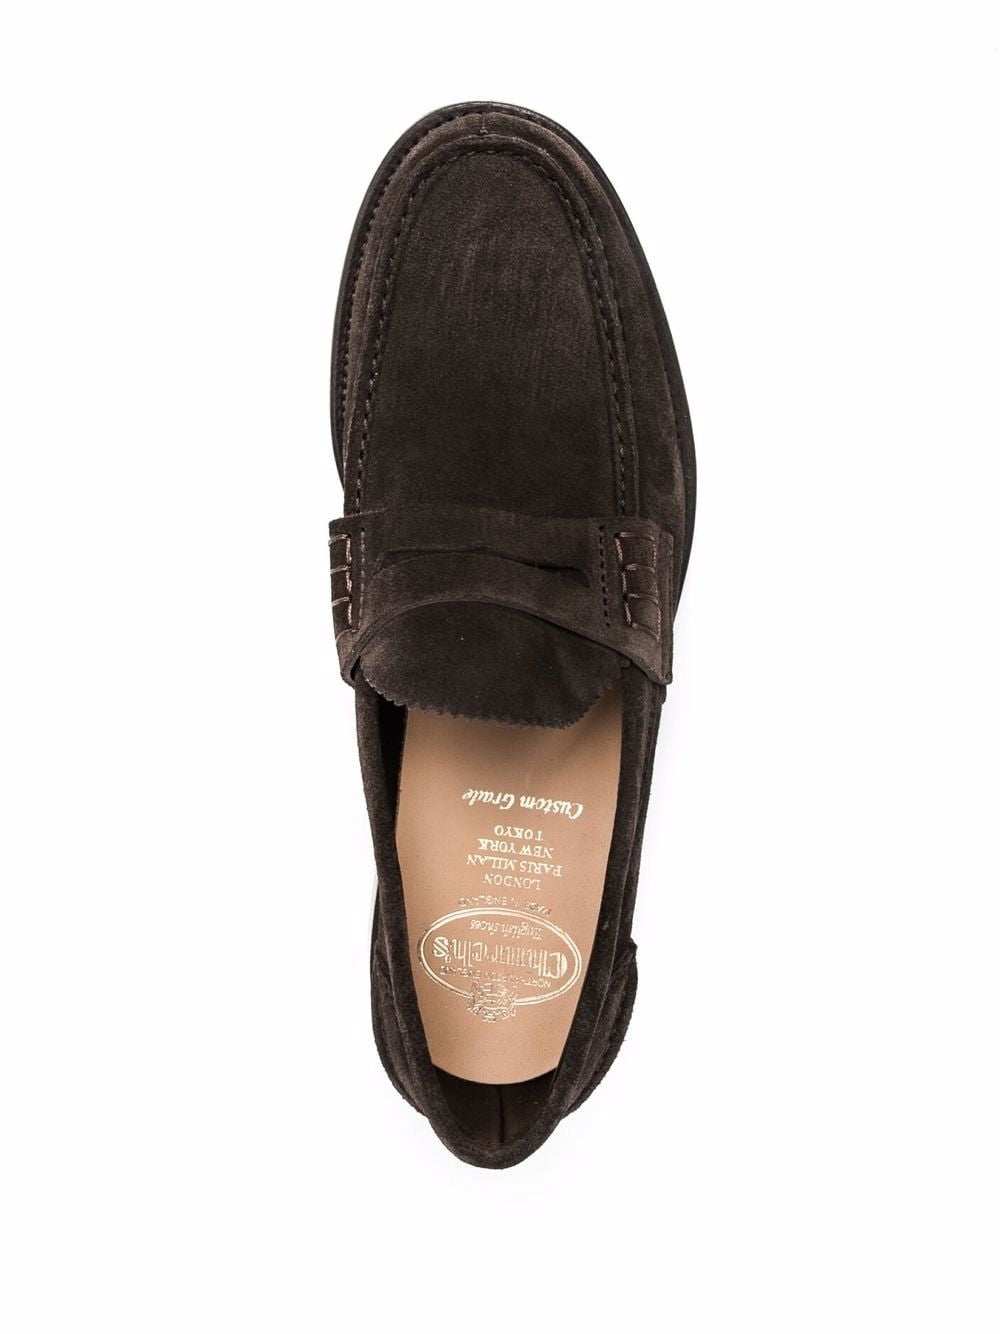 CHURCH'S Blue Suede Penny Loafers for Men - SS23 Collection